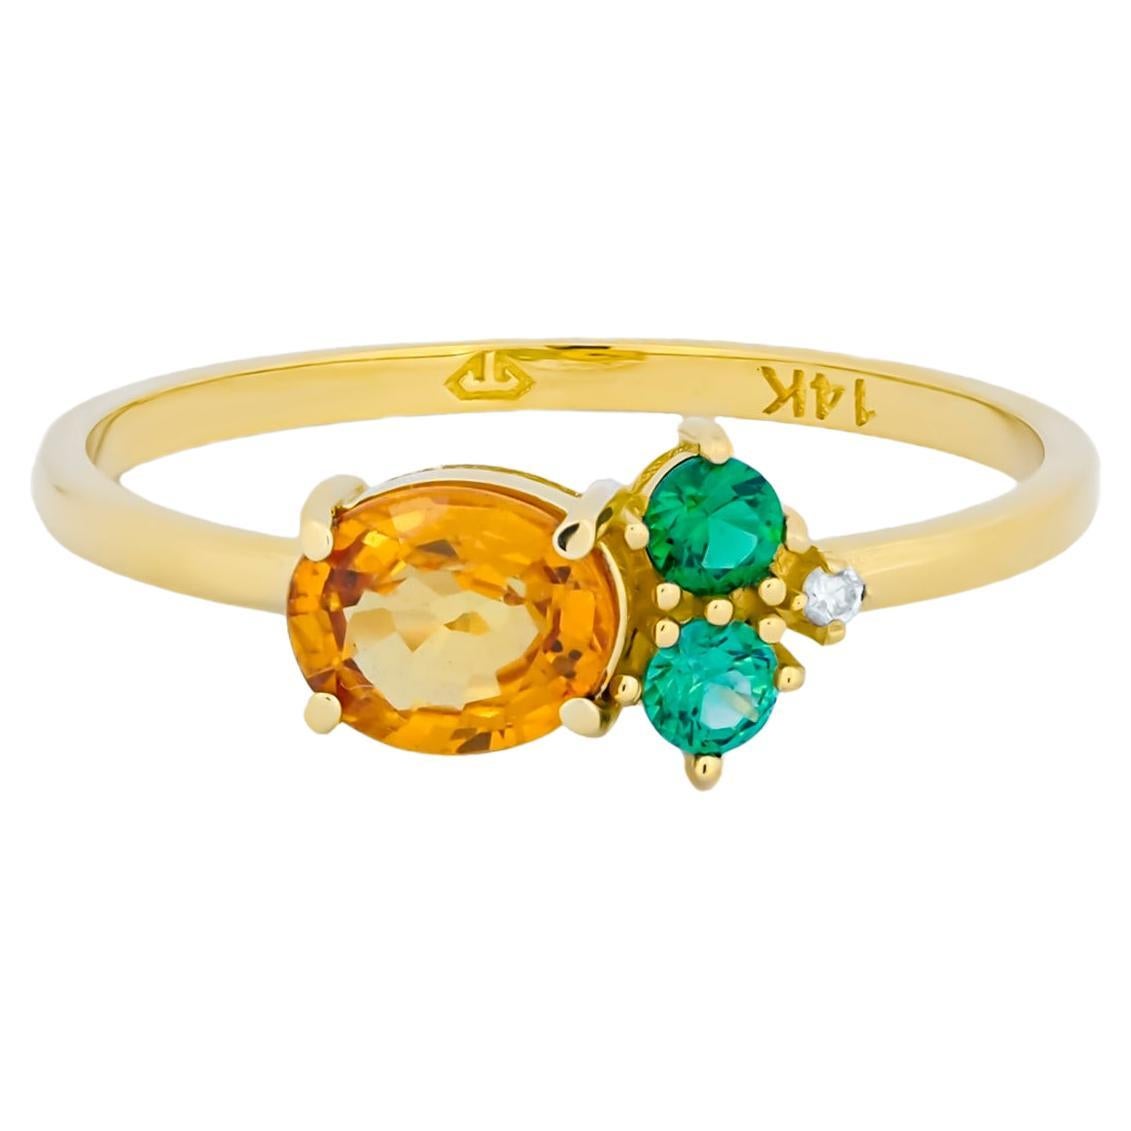 Oval sapphire, tsavorite and diamonds 14k gold ring. For Sale